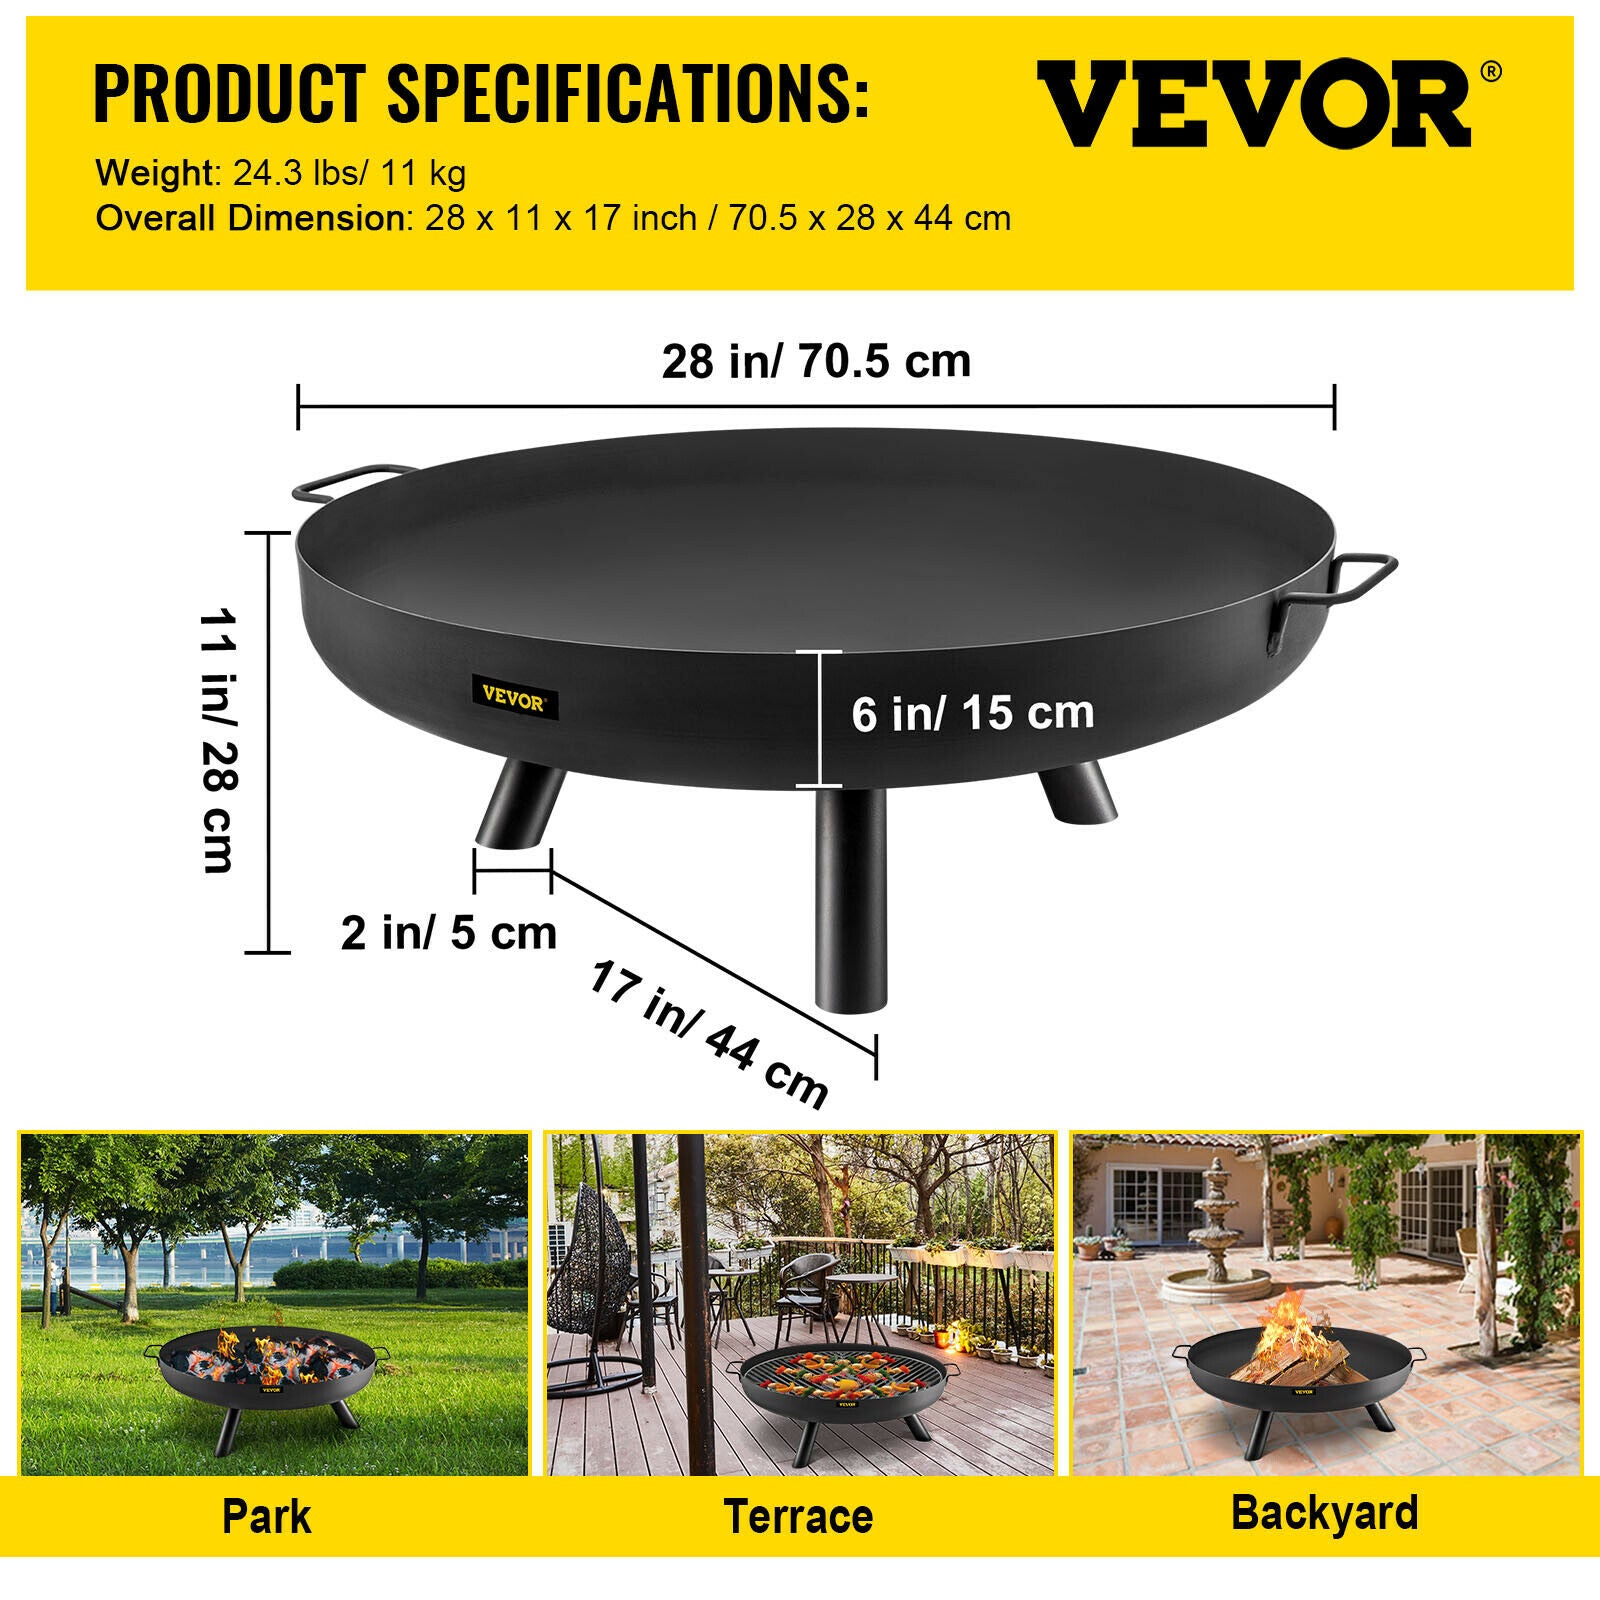 VEVOR Fire Pit Bowl BBQ Stove 22'' 28'' 30'' Carbon Steel / Cast Iron for Keeping Warm, Outdoor Patios Terrace Backyard Barbecue - DragonHearth